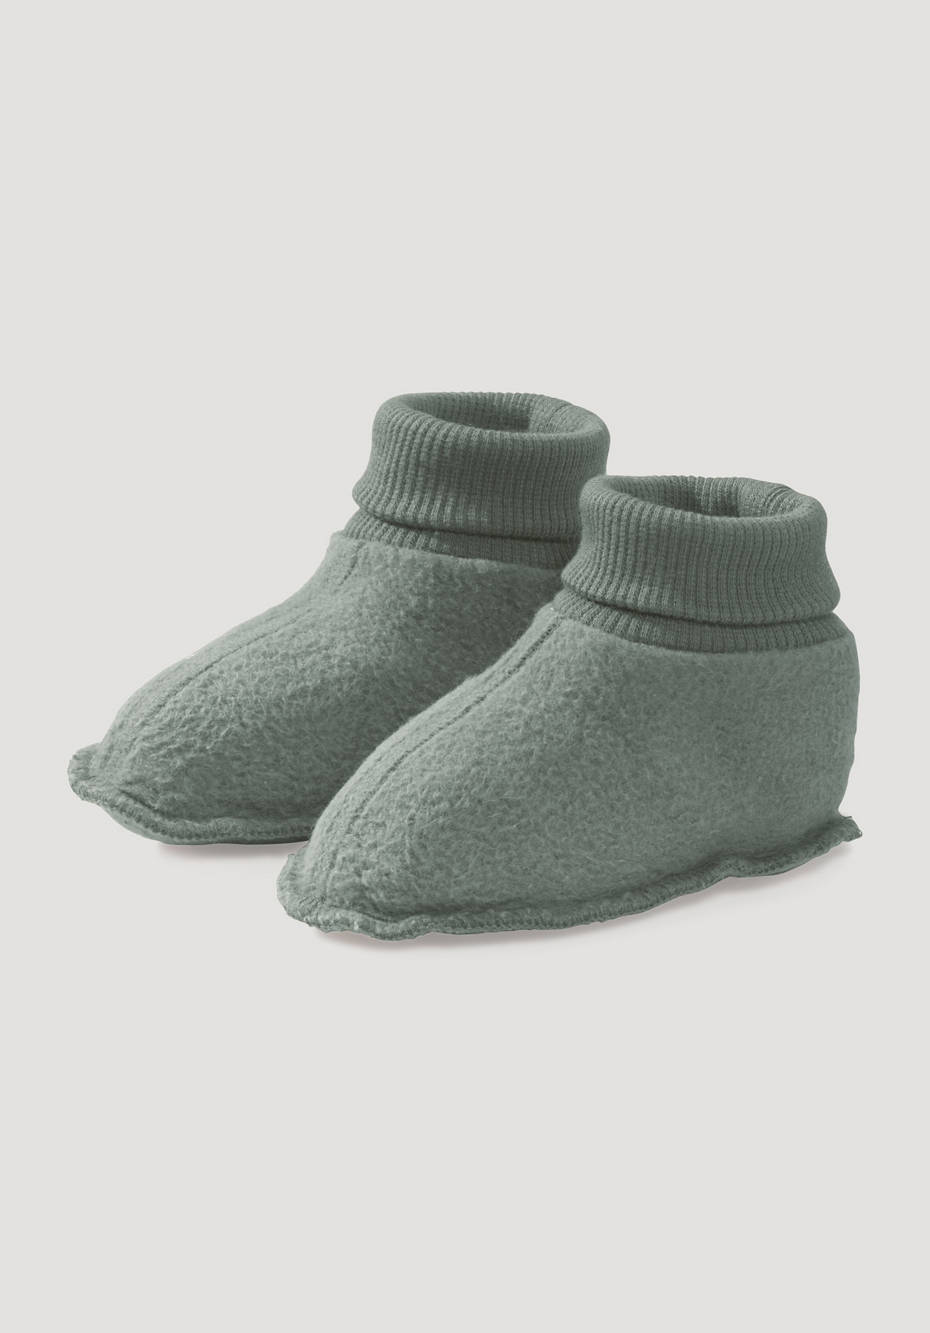 Soft fleece shoes made from pure organic cotton